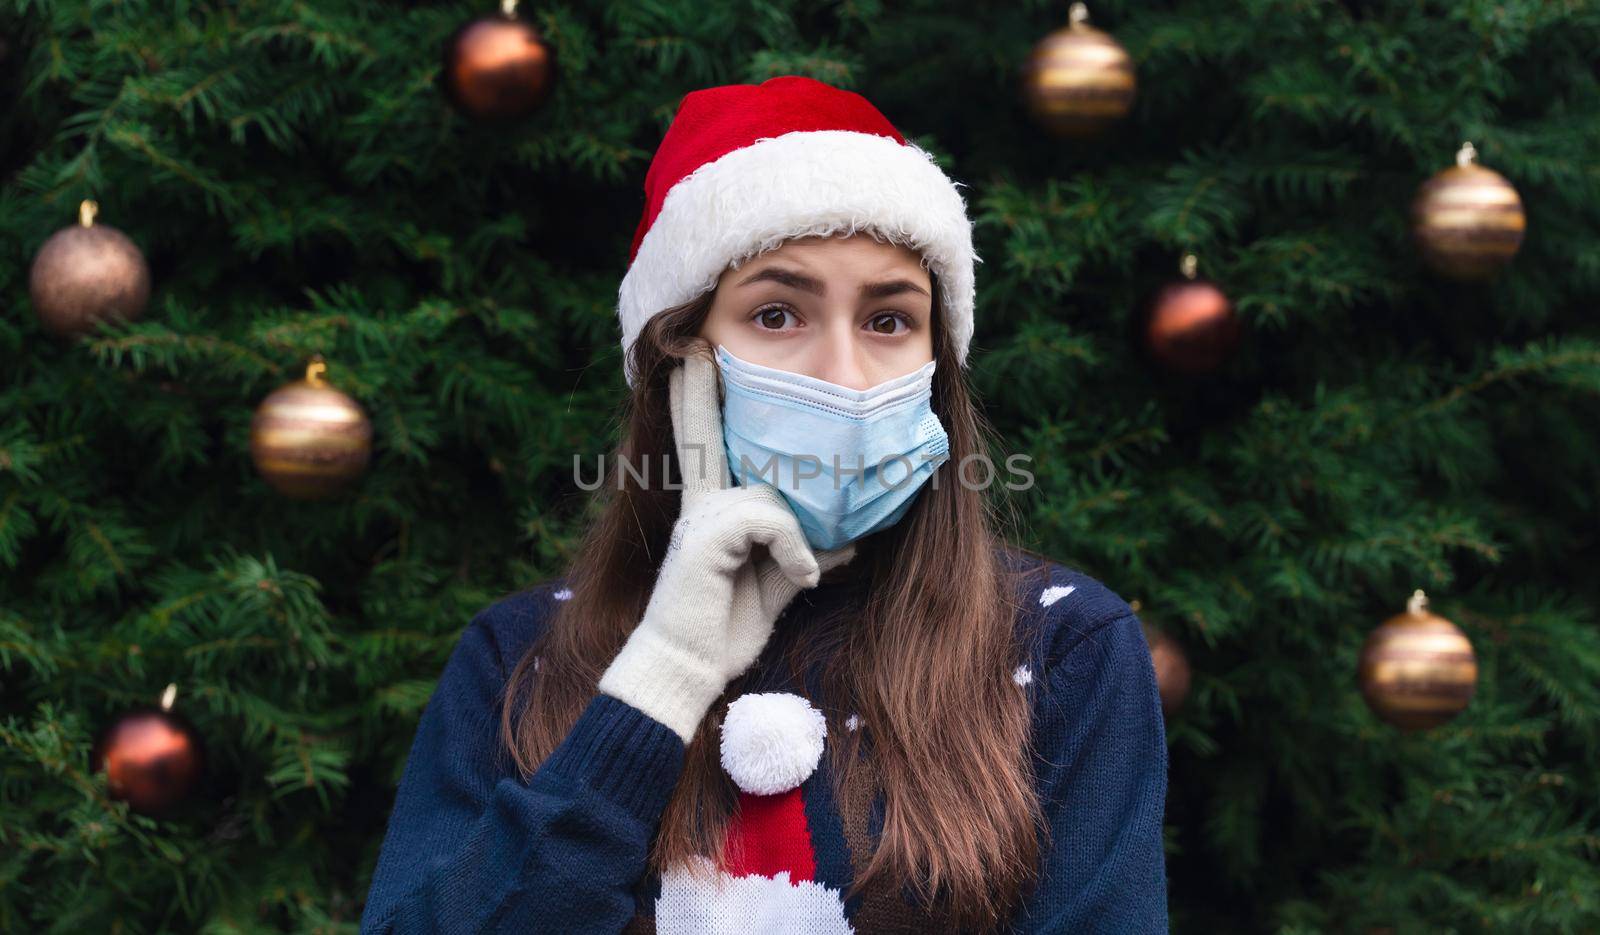 Choosing a gift. Close up Portrait of woman wearing a santa claus hat and medical mask with emotion. Against the background of a Christmas tree. Coronavirus pandemic